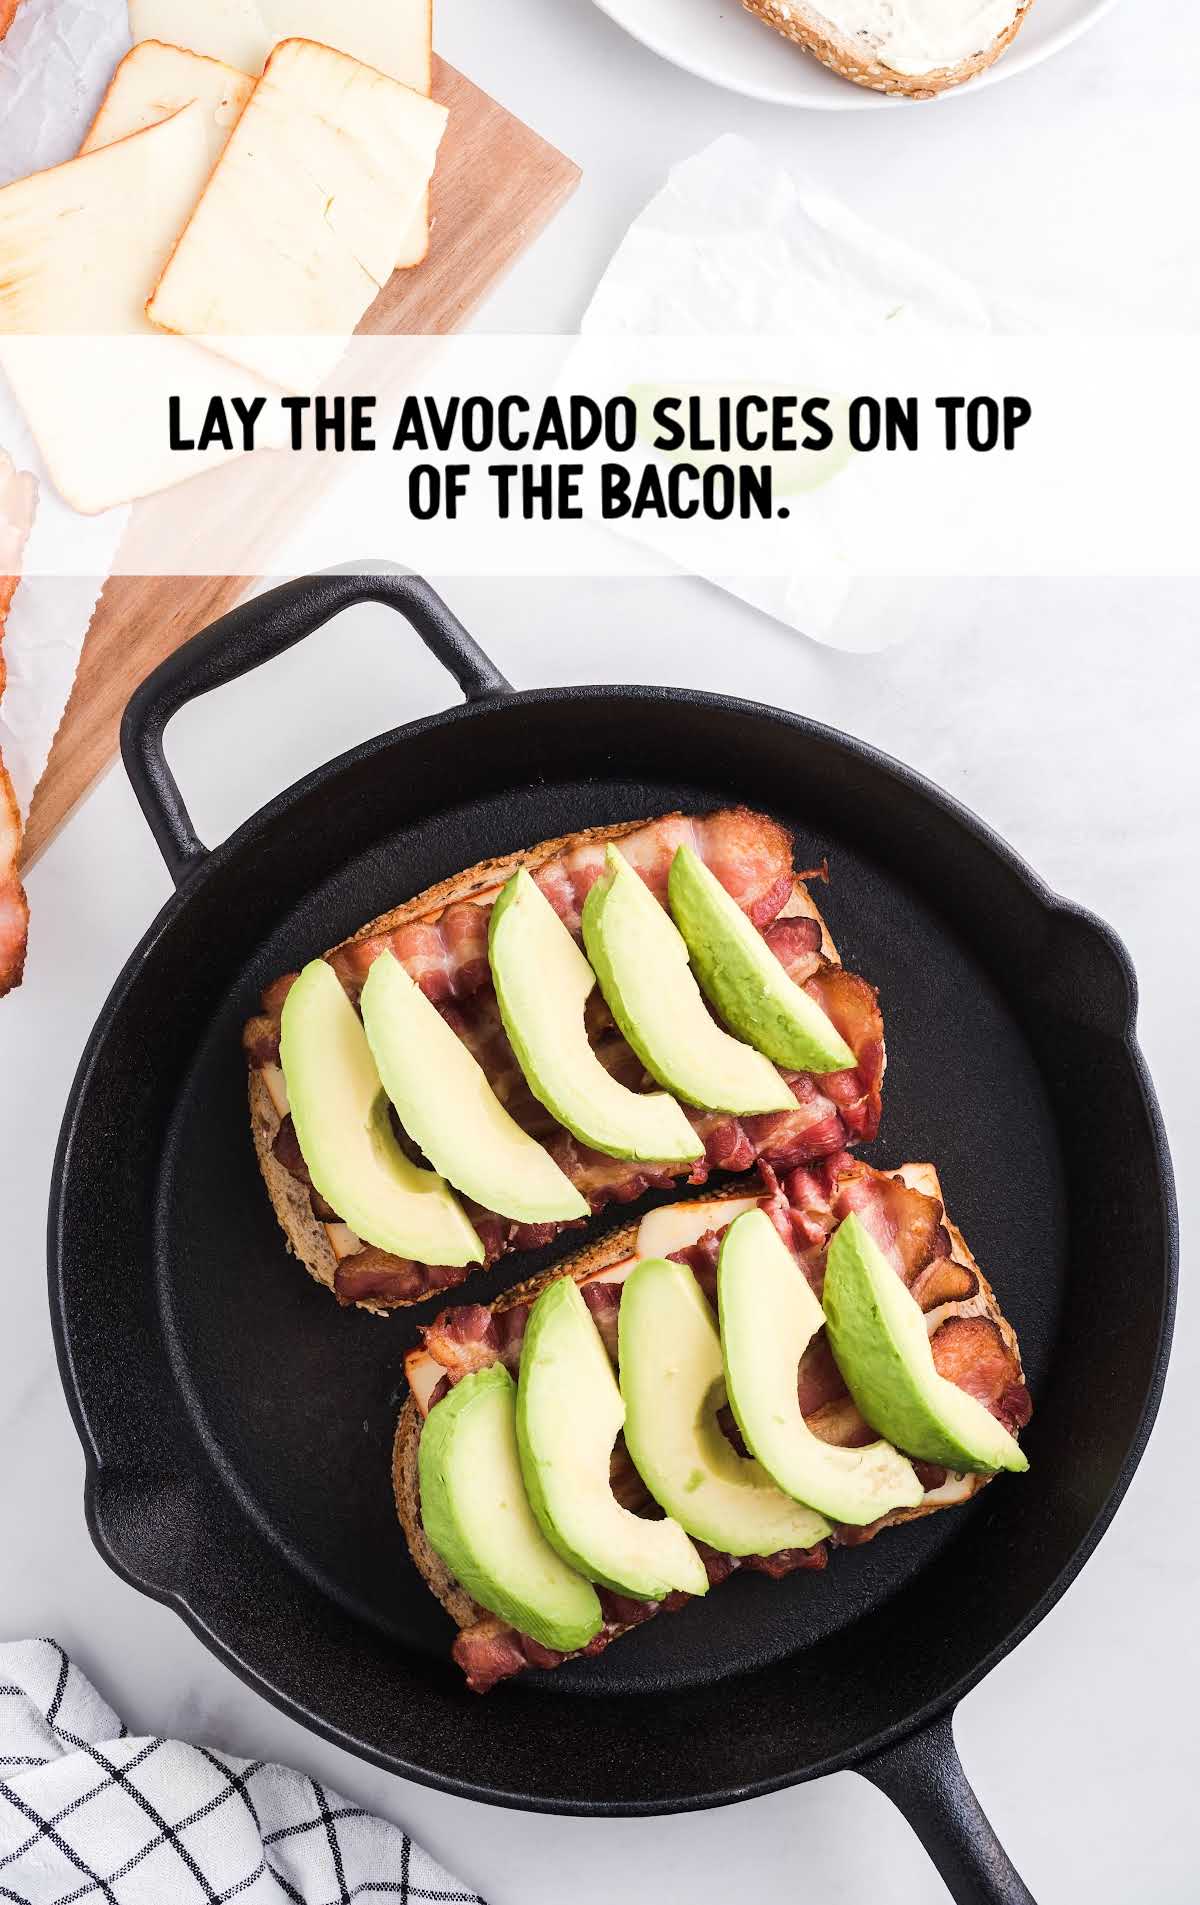 bacon avocado sandwich process shot of avocado slices being layer on top of bacon in a skillet